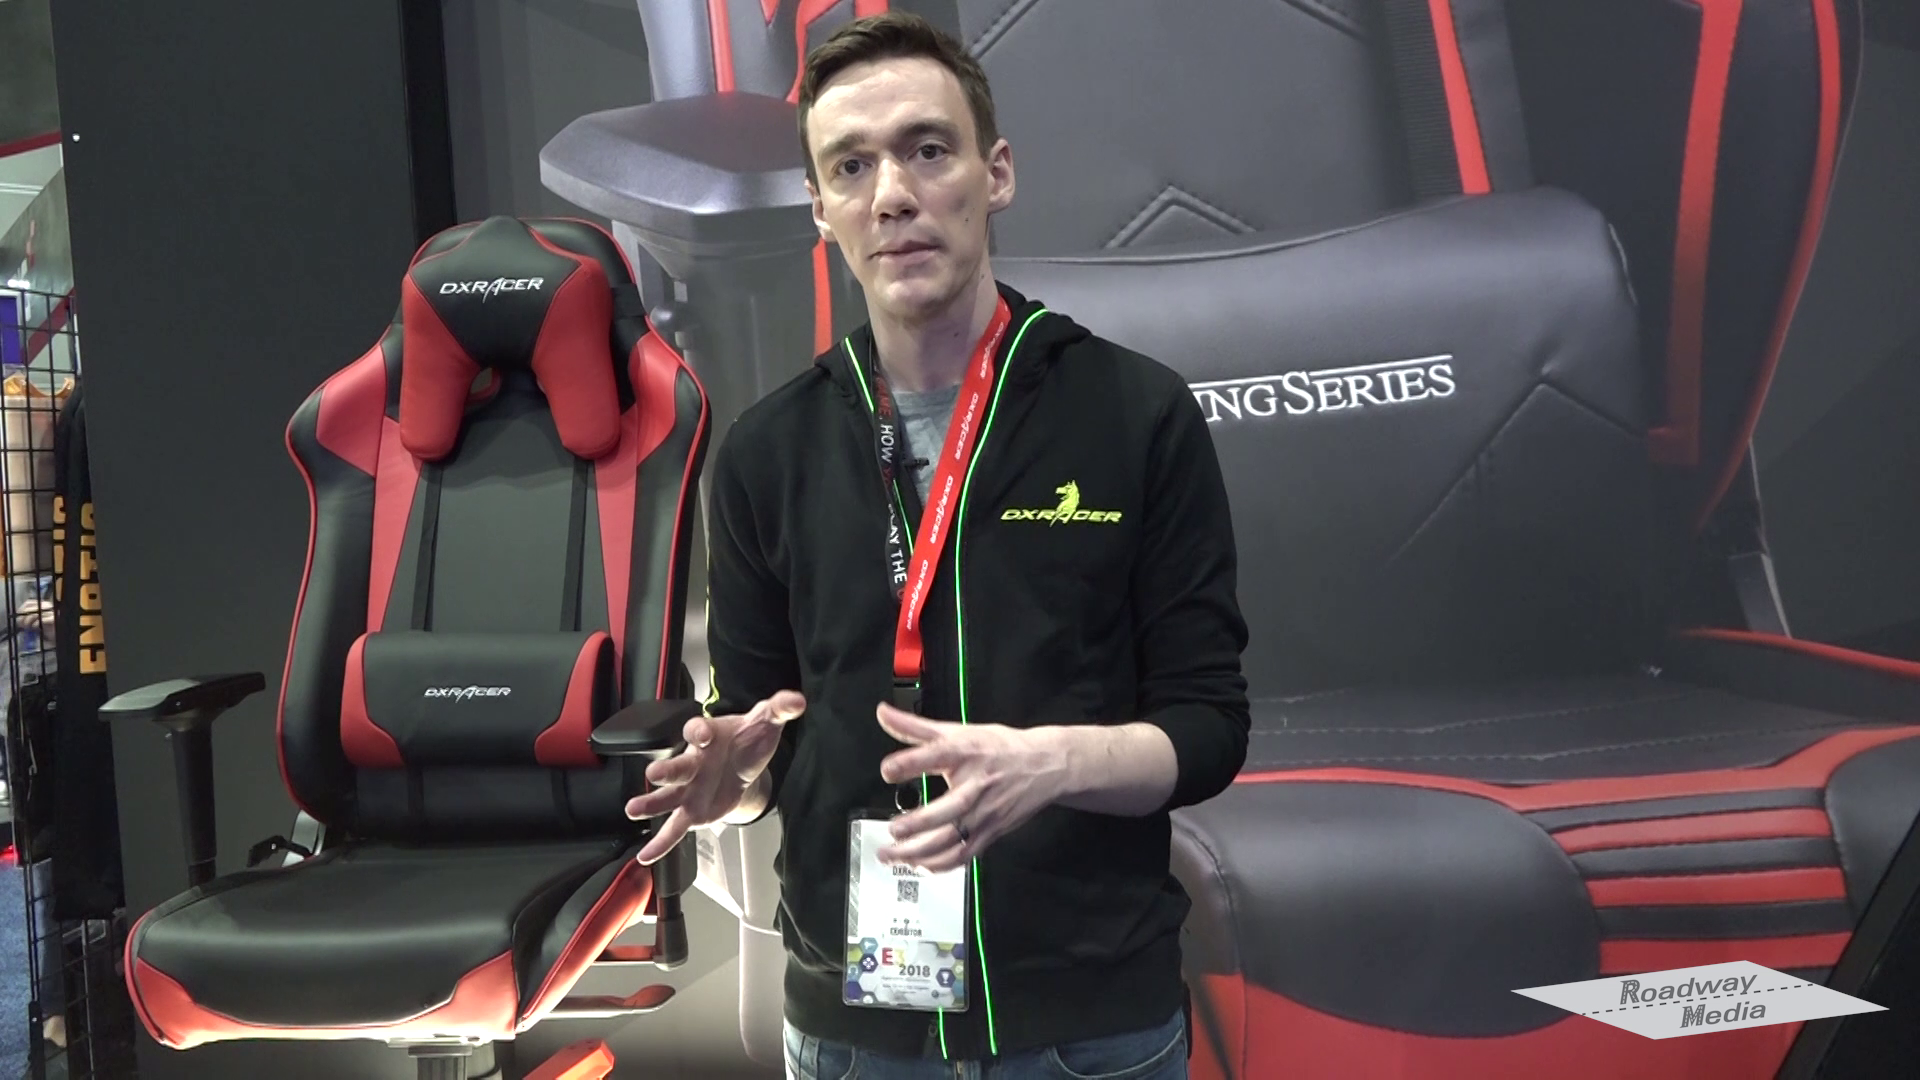 DX Racer, AK Racing and Ewin Racing offer chairs for gamers at E3